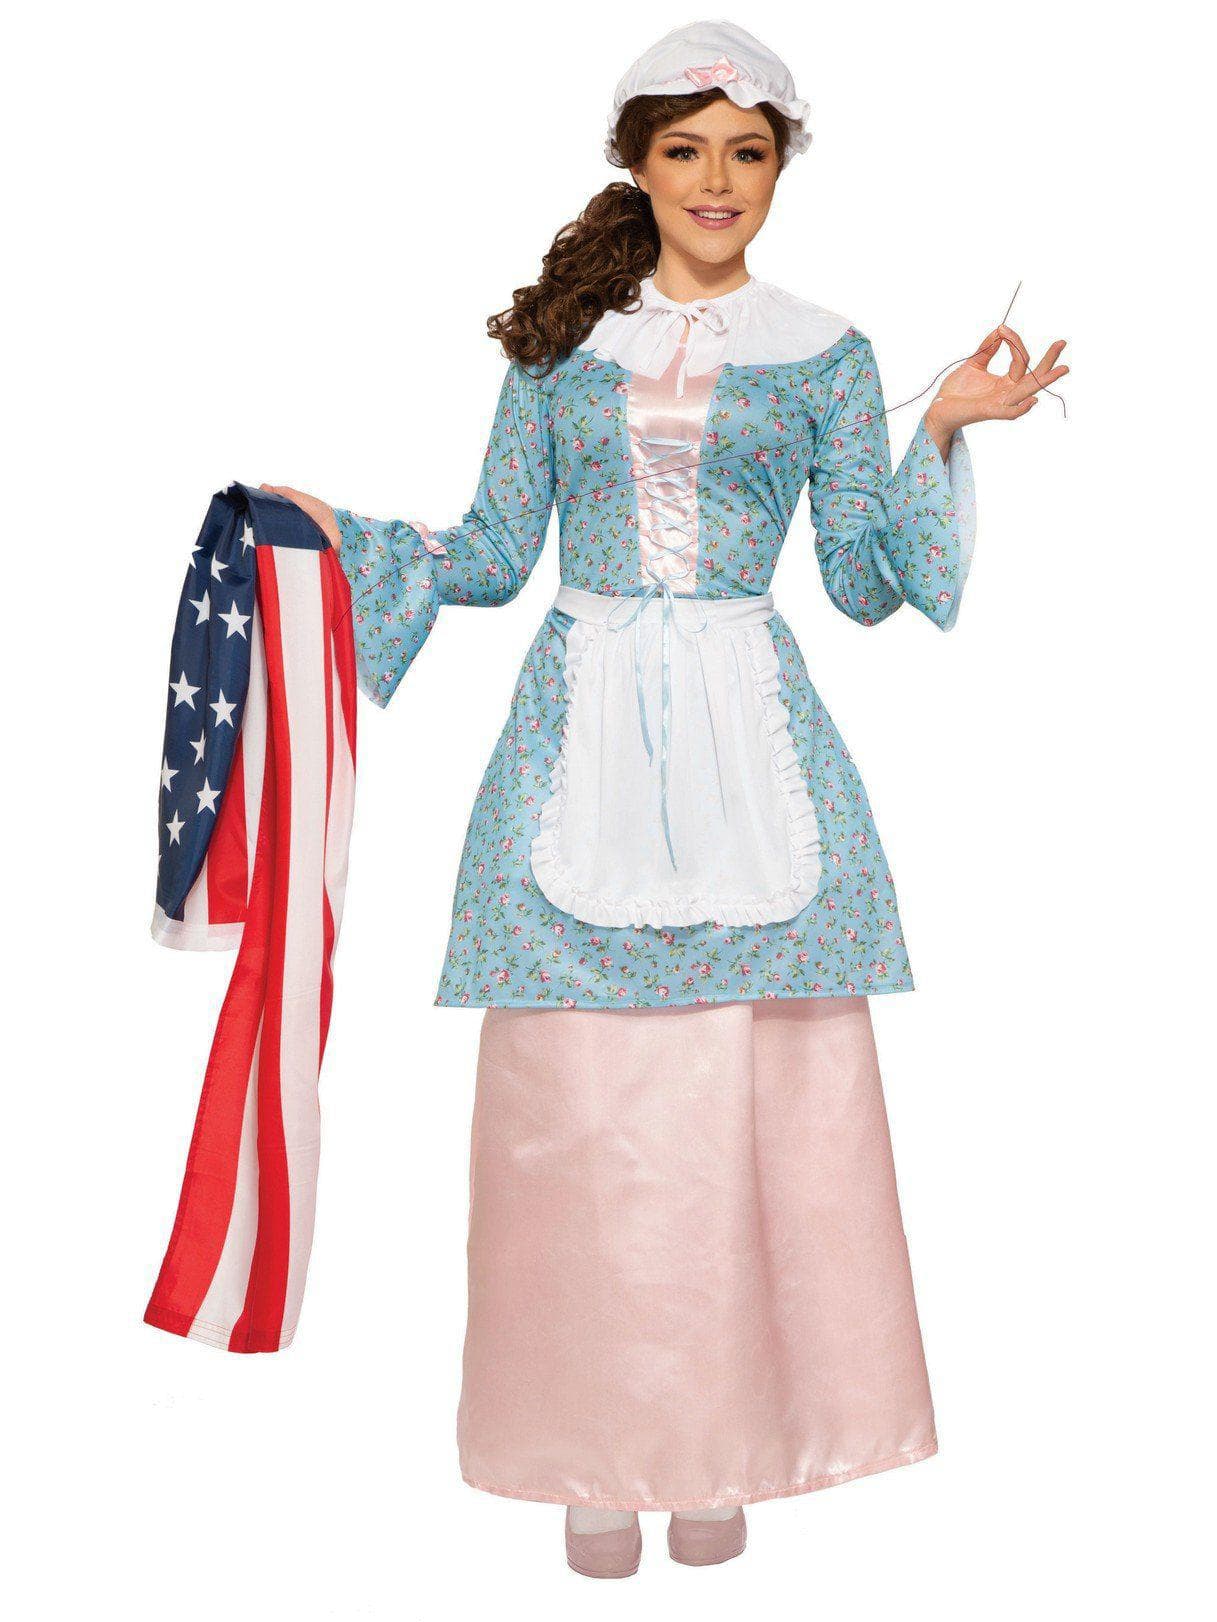 Adult Betsy Ross Costume - costumes.com